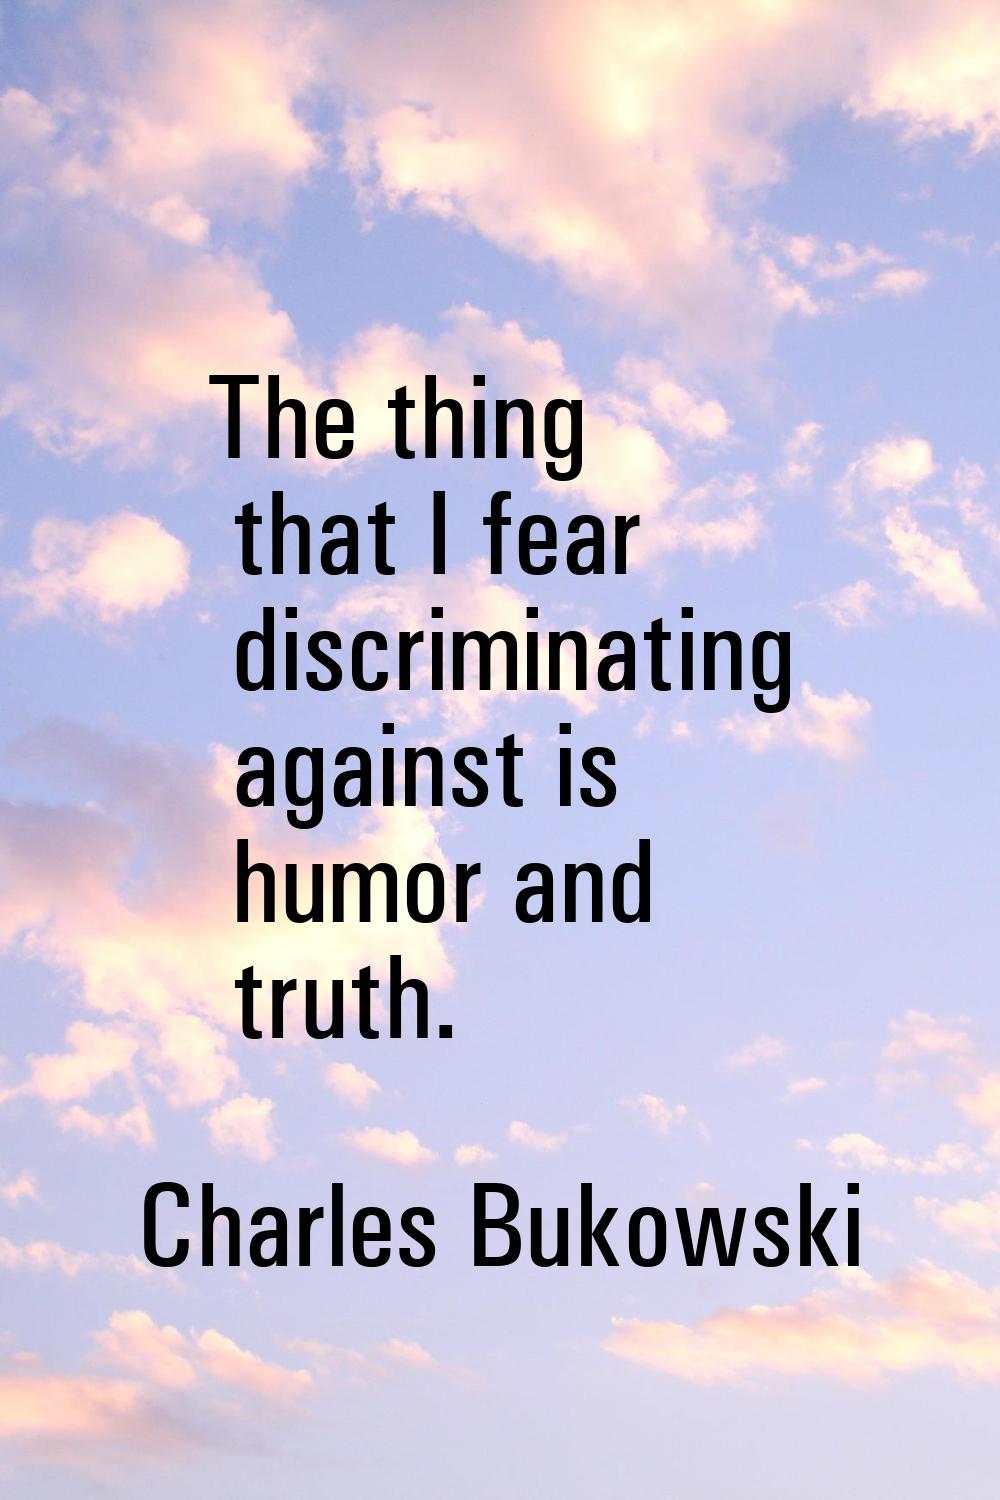 The thing that I fear discriminating against is humor and truth.